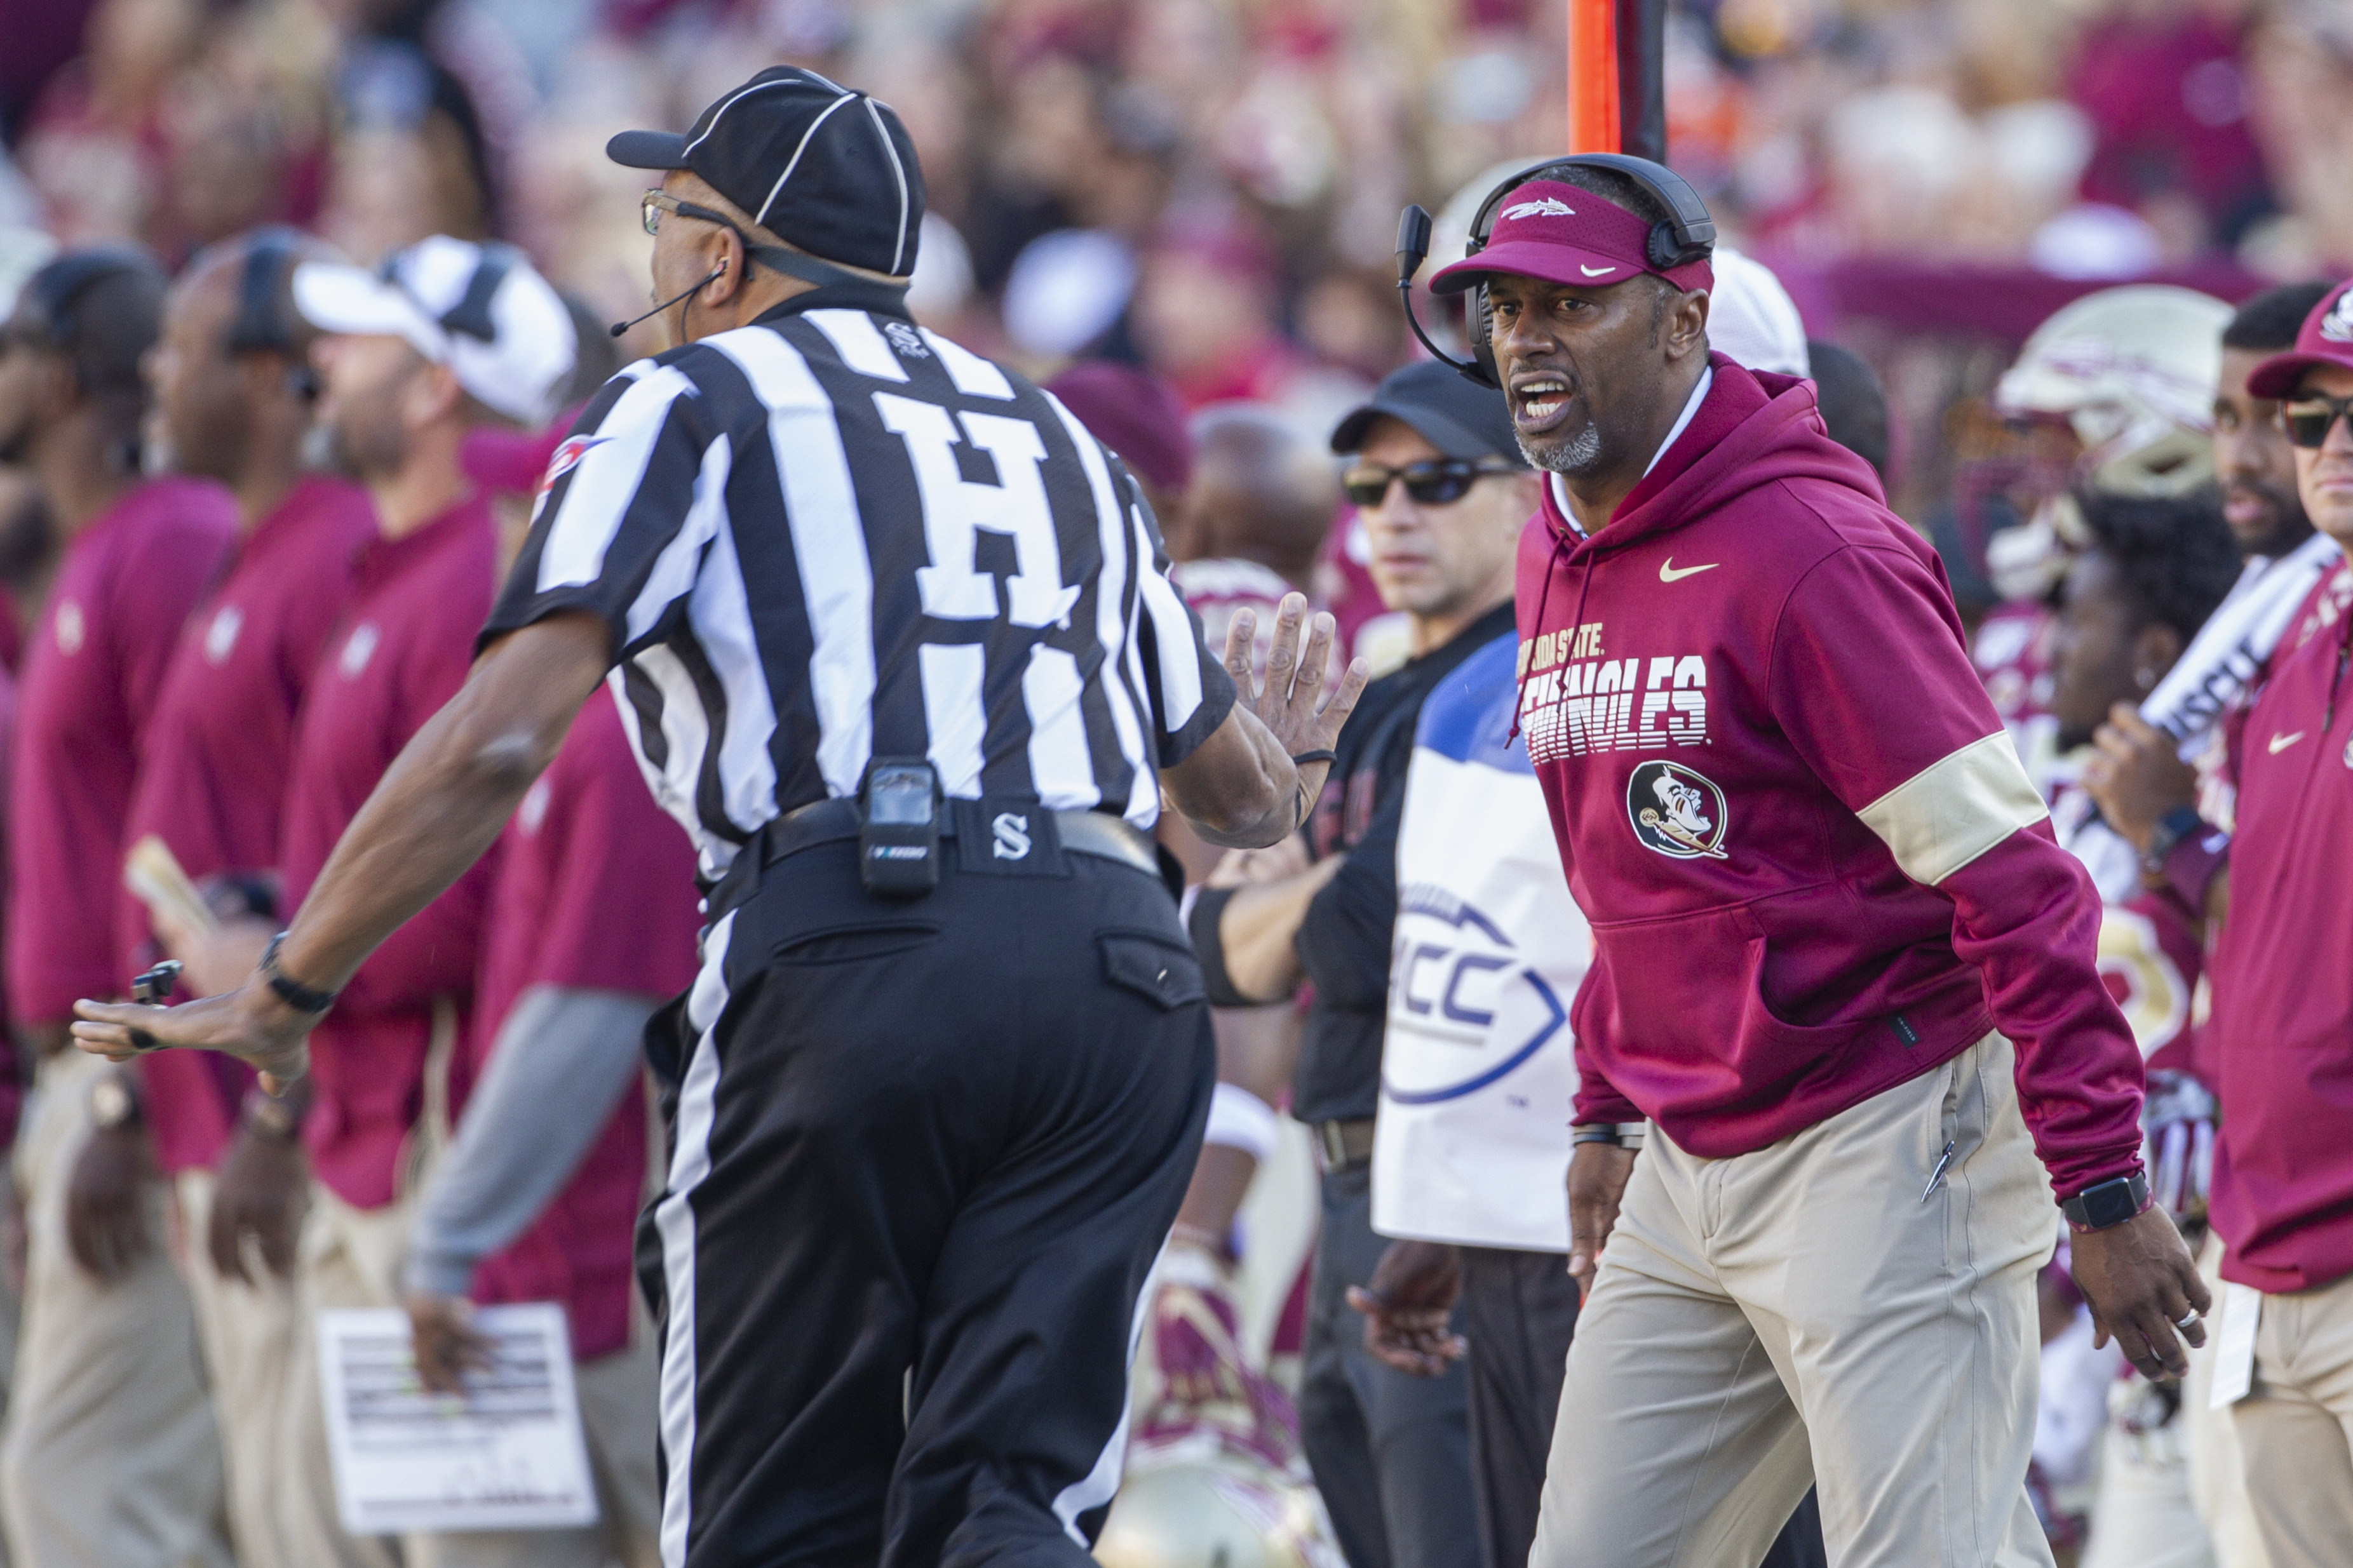 Florida State fires coach Willie Taggart after 21 games